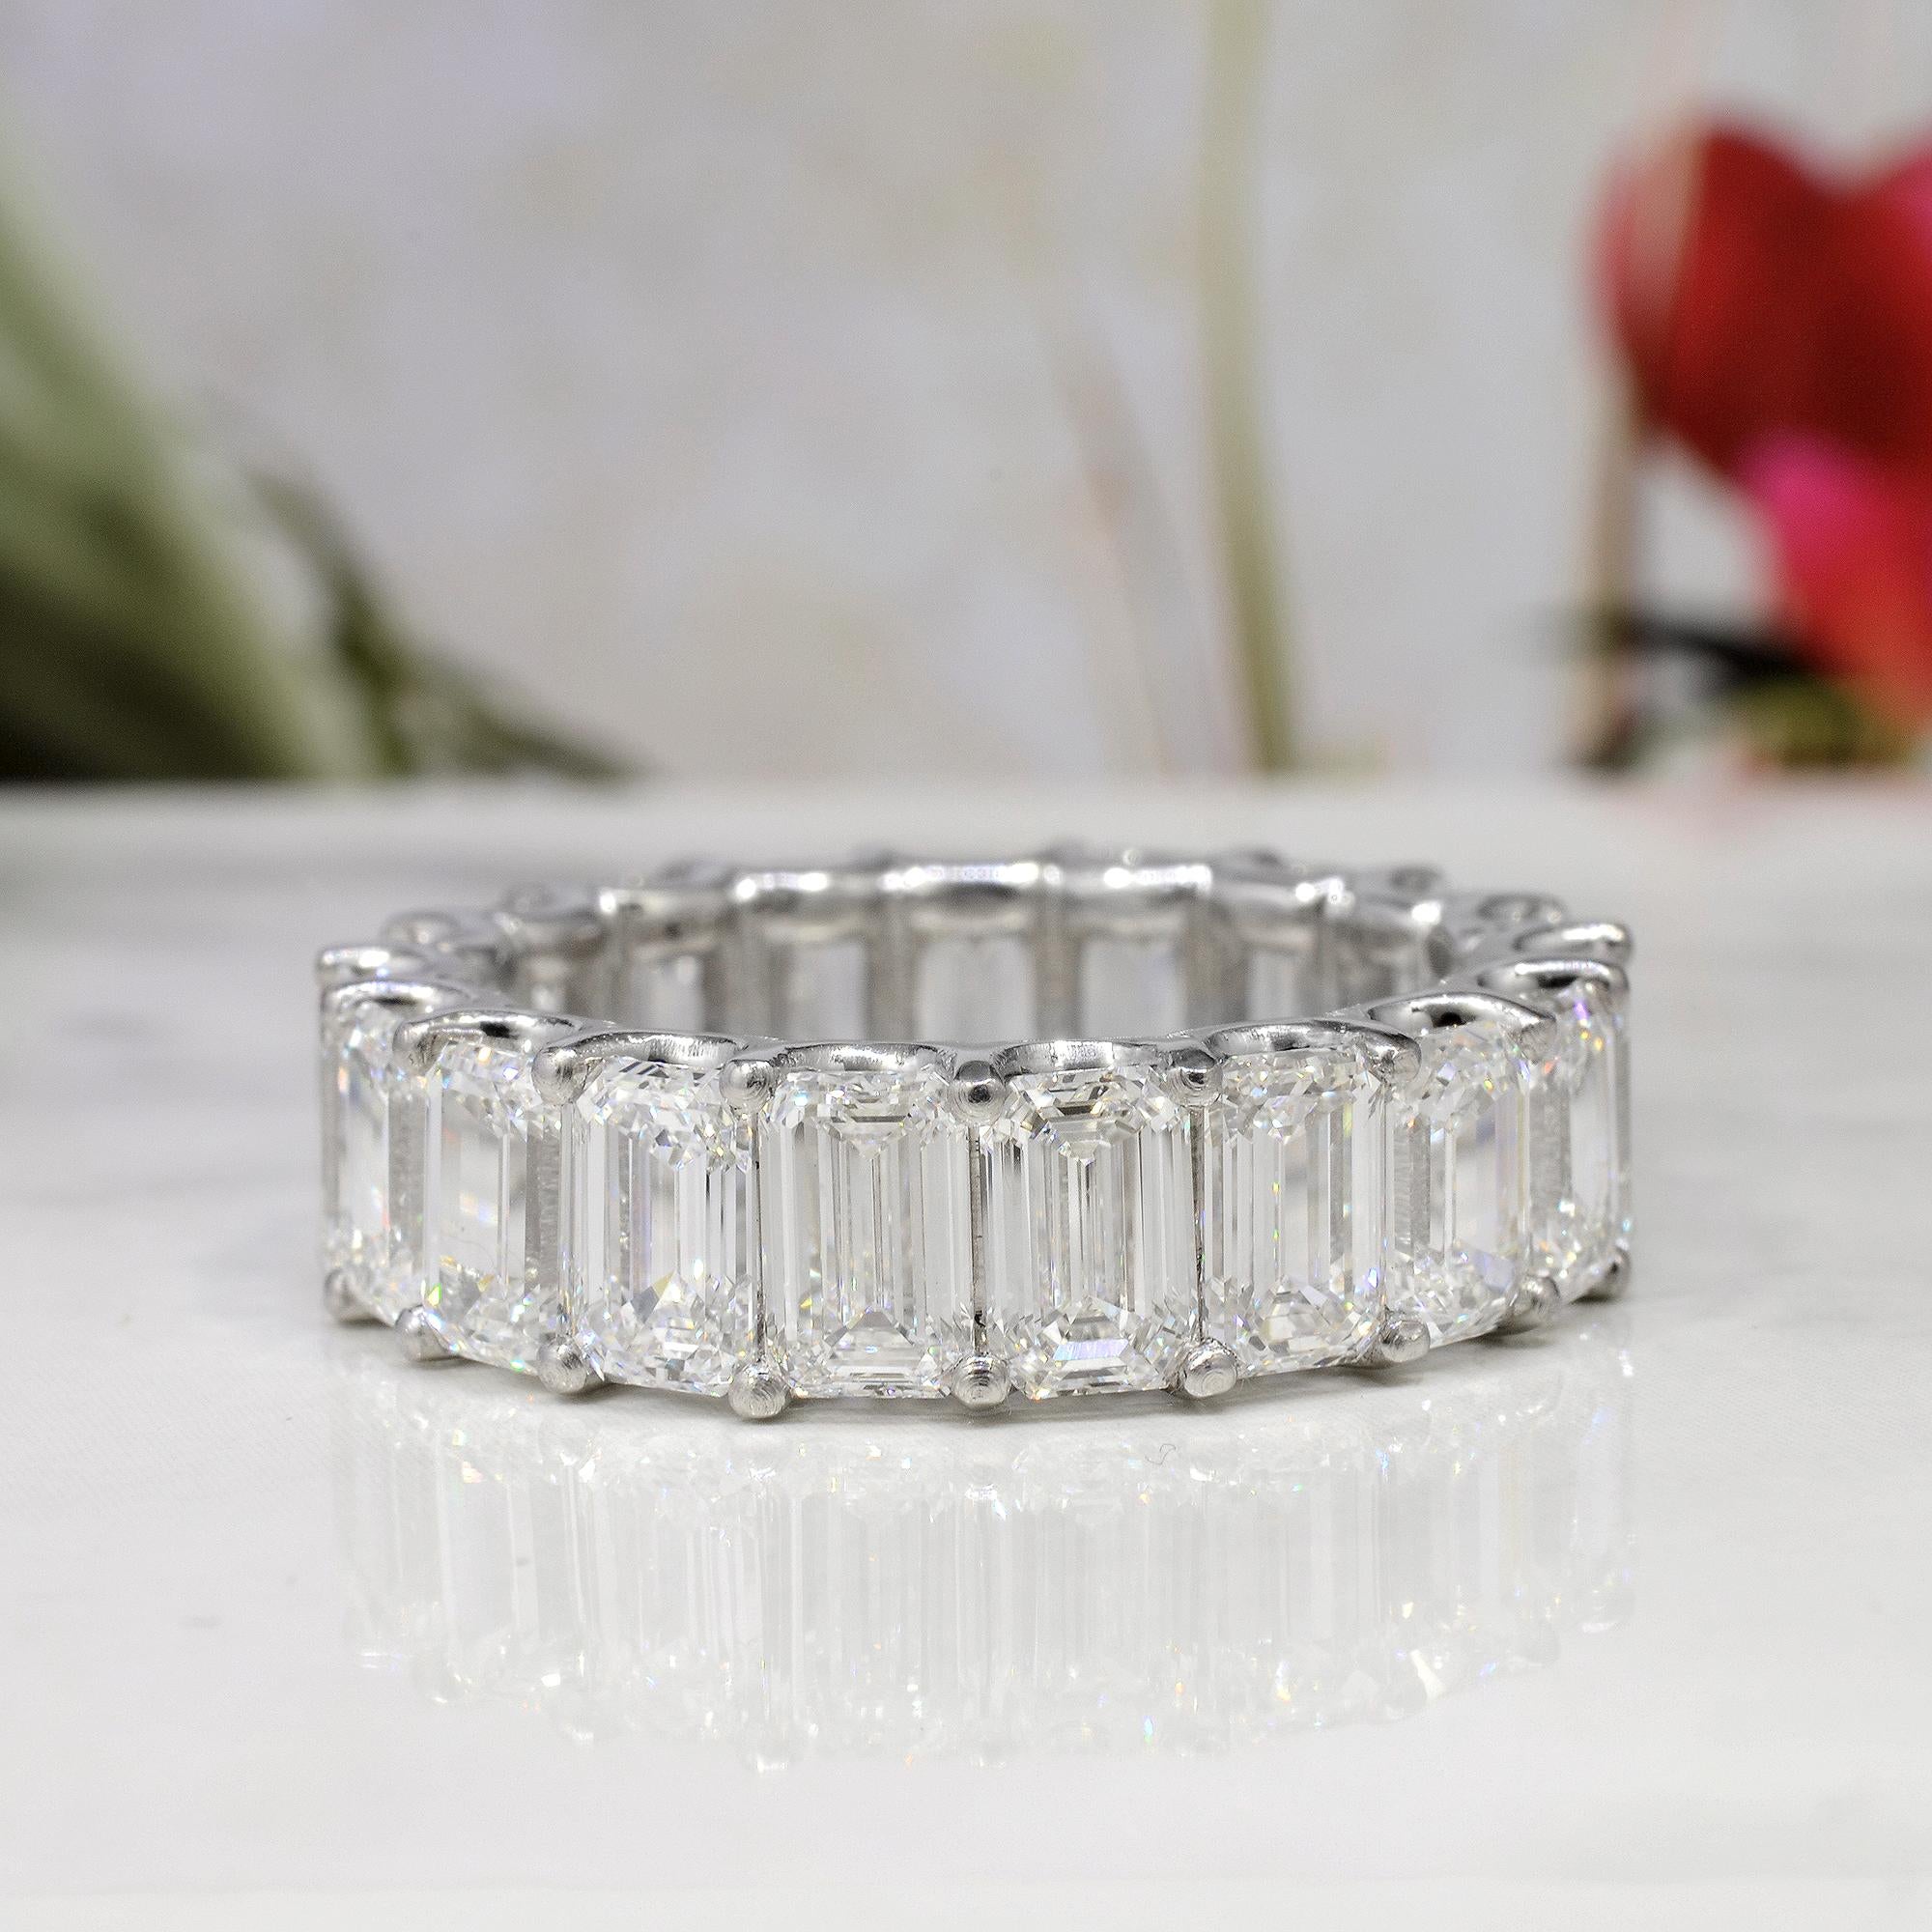 For Sale:  8.00 Carat Shared Prong Emerald Cut Diamond Eternity Ring G Color / VS1 18K Gold 5